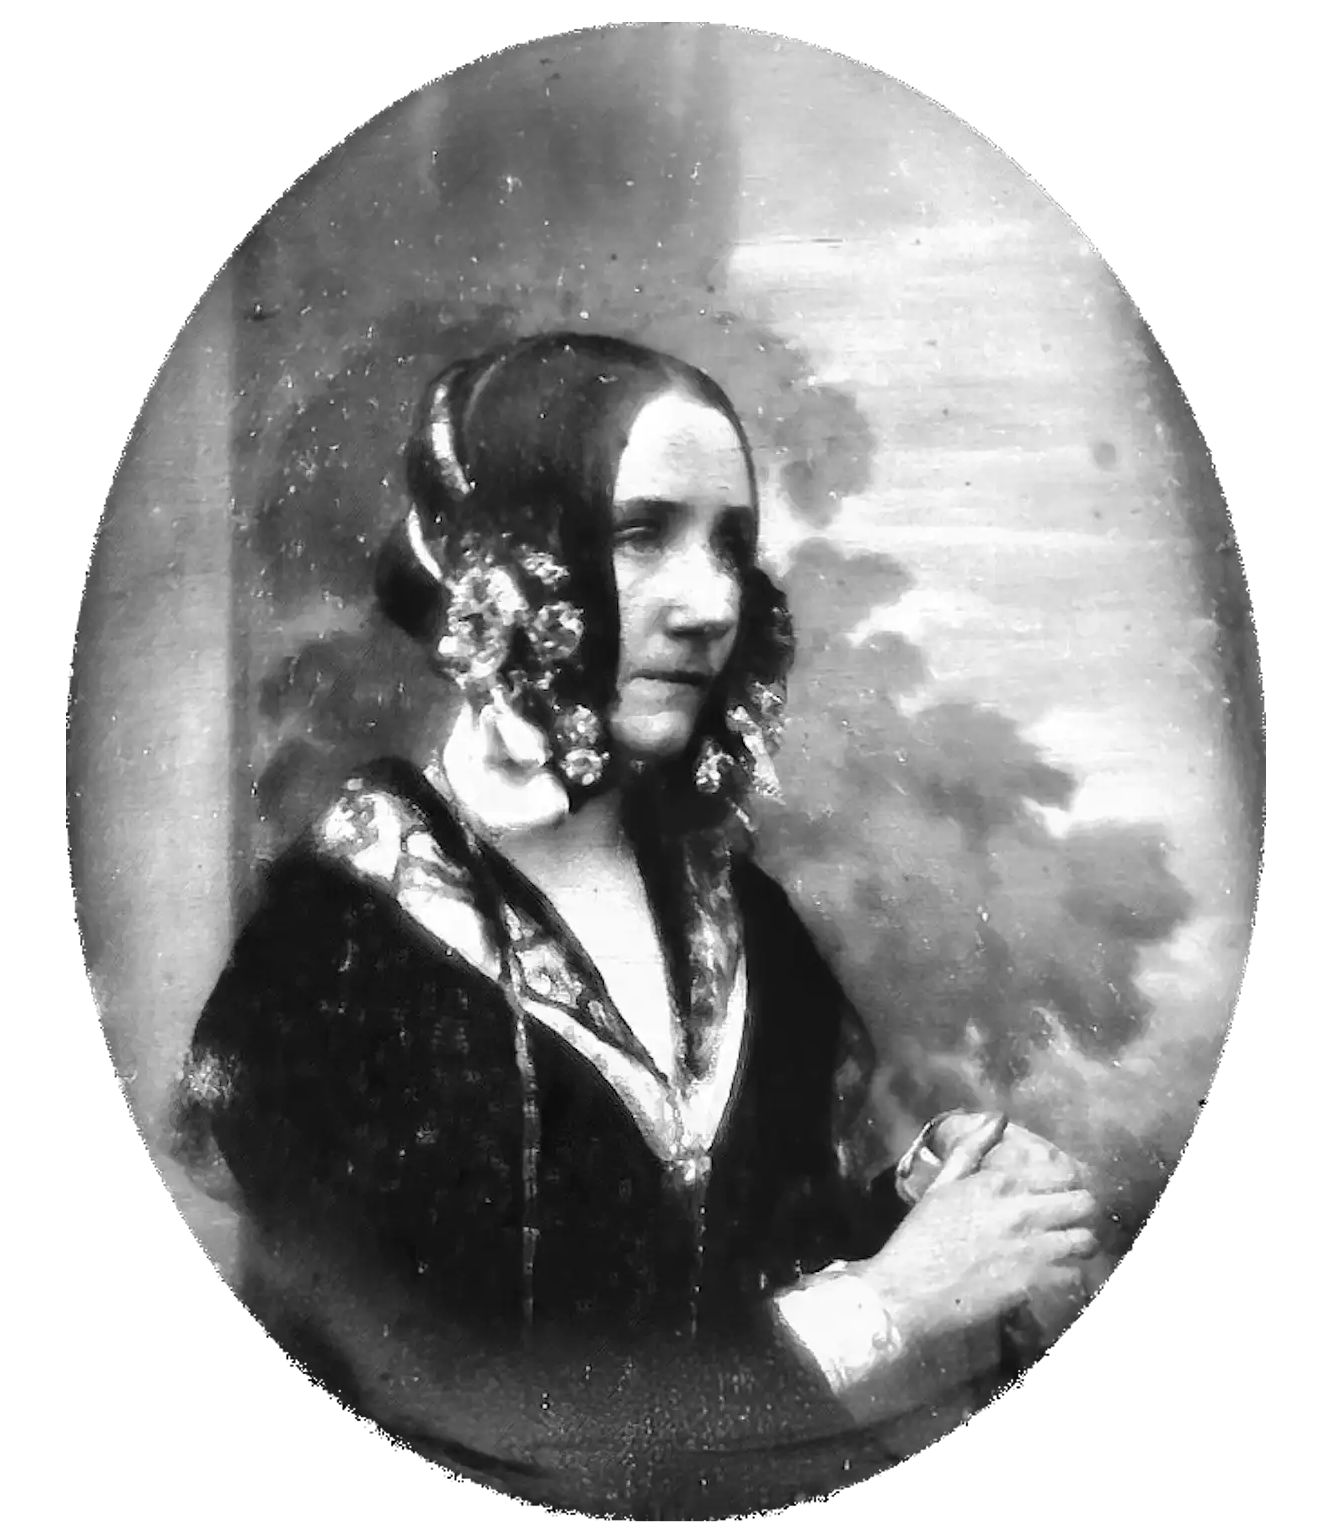 A rare photograph of Ada Lovelace. Daguerreotype by Antoine Claudet. (Image: Wikimedia Commons)